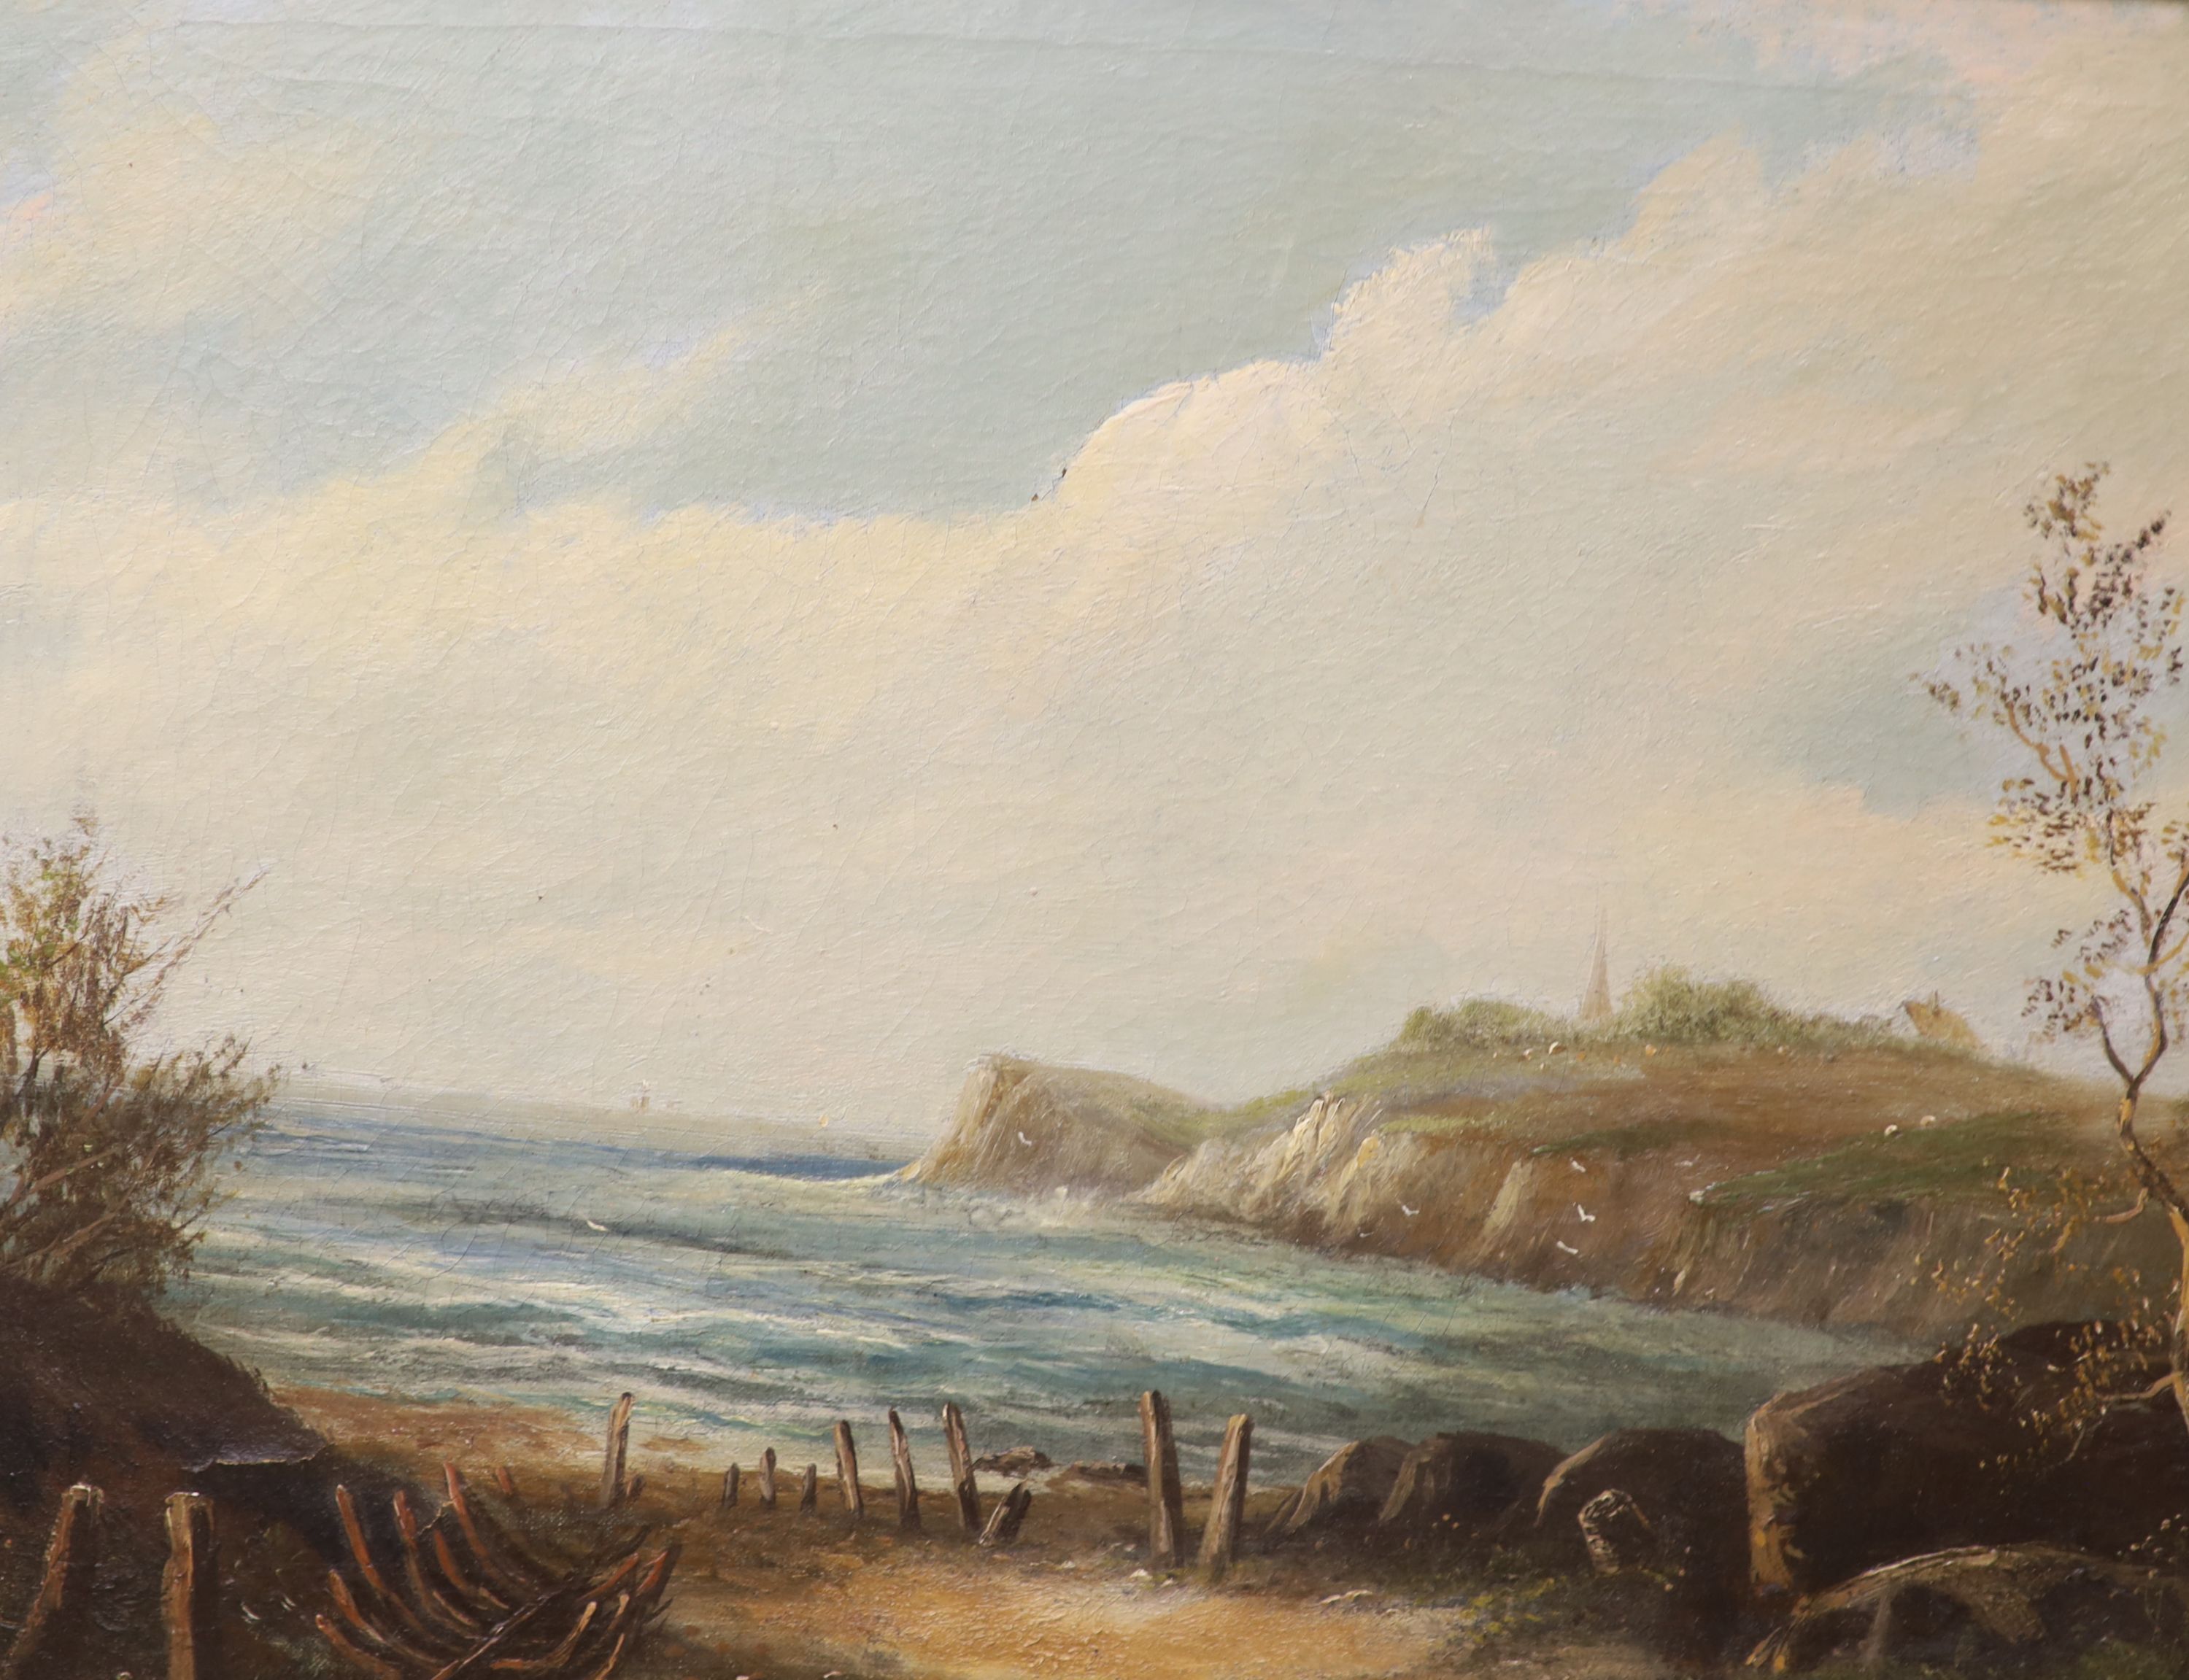 R. Marshall, oil on canvas, Waterfall, 50 x 39cm and a Coastal landscape by another hand, 36 x 49cm